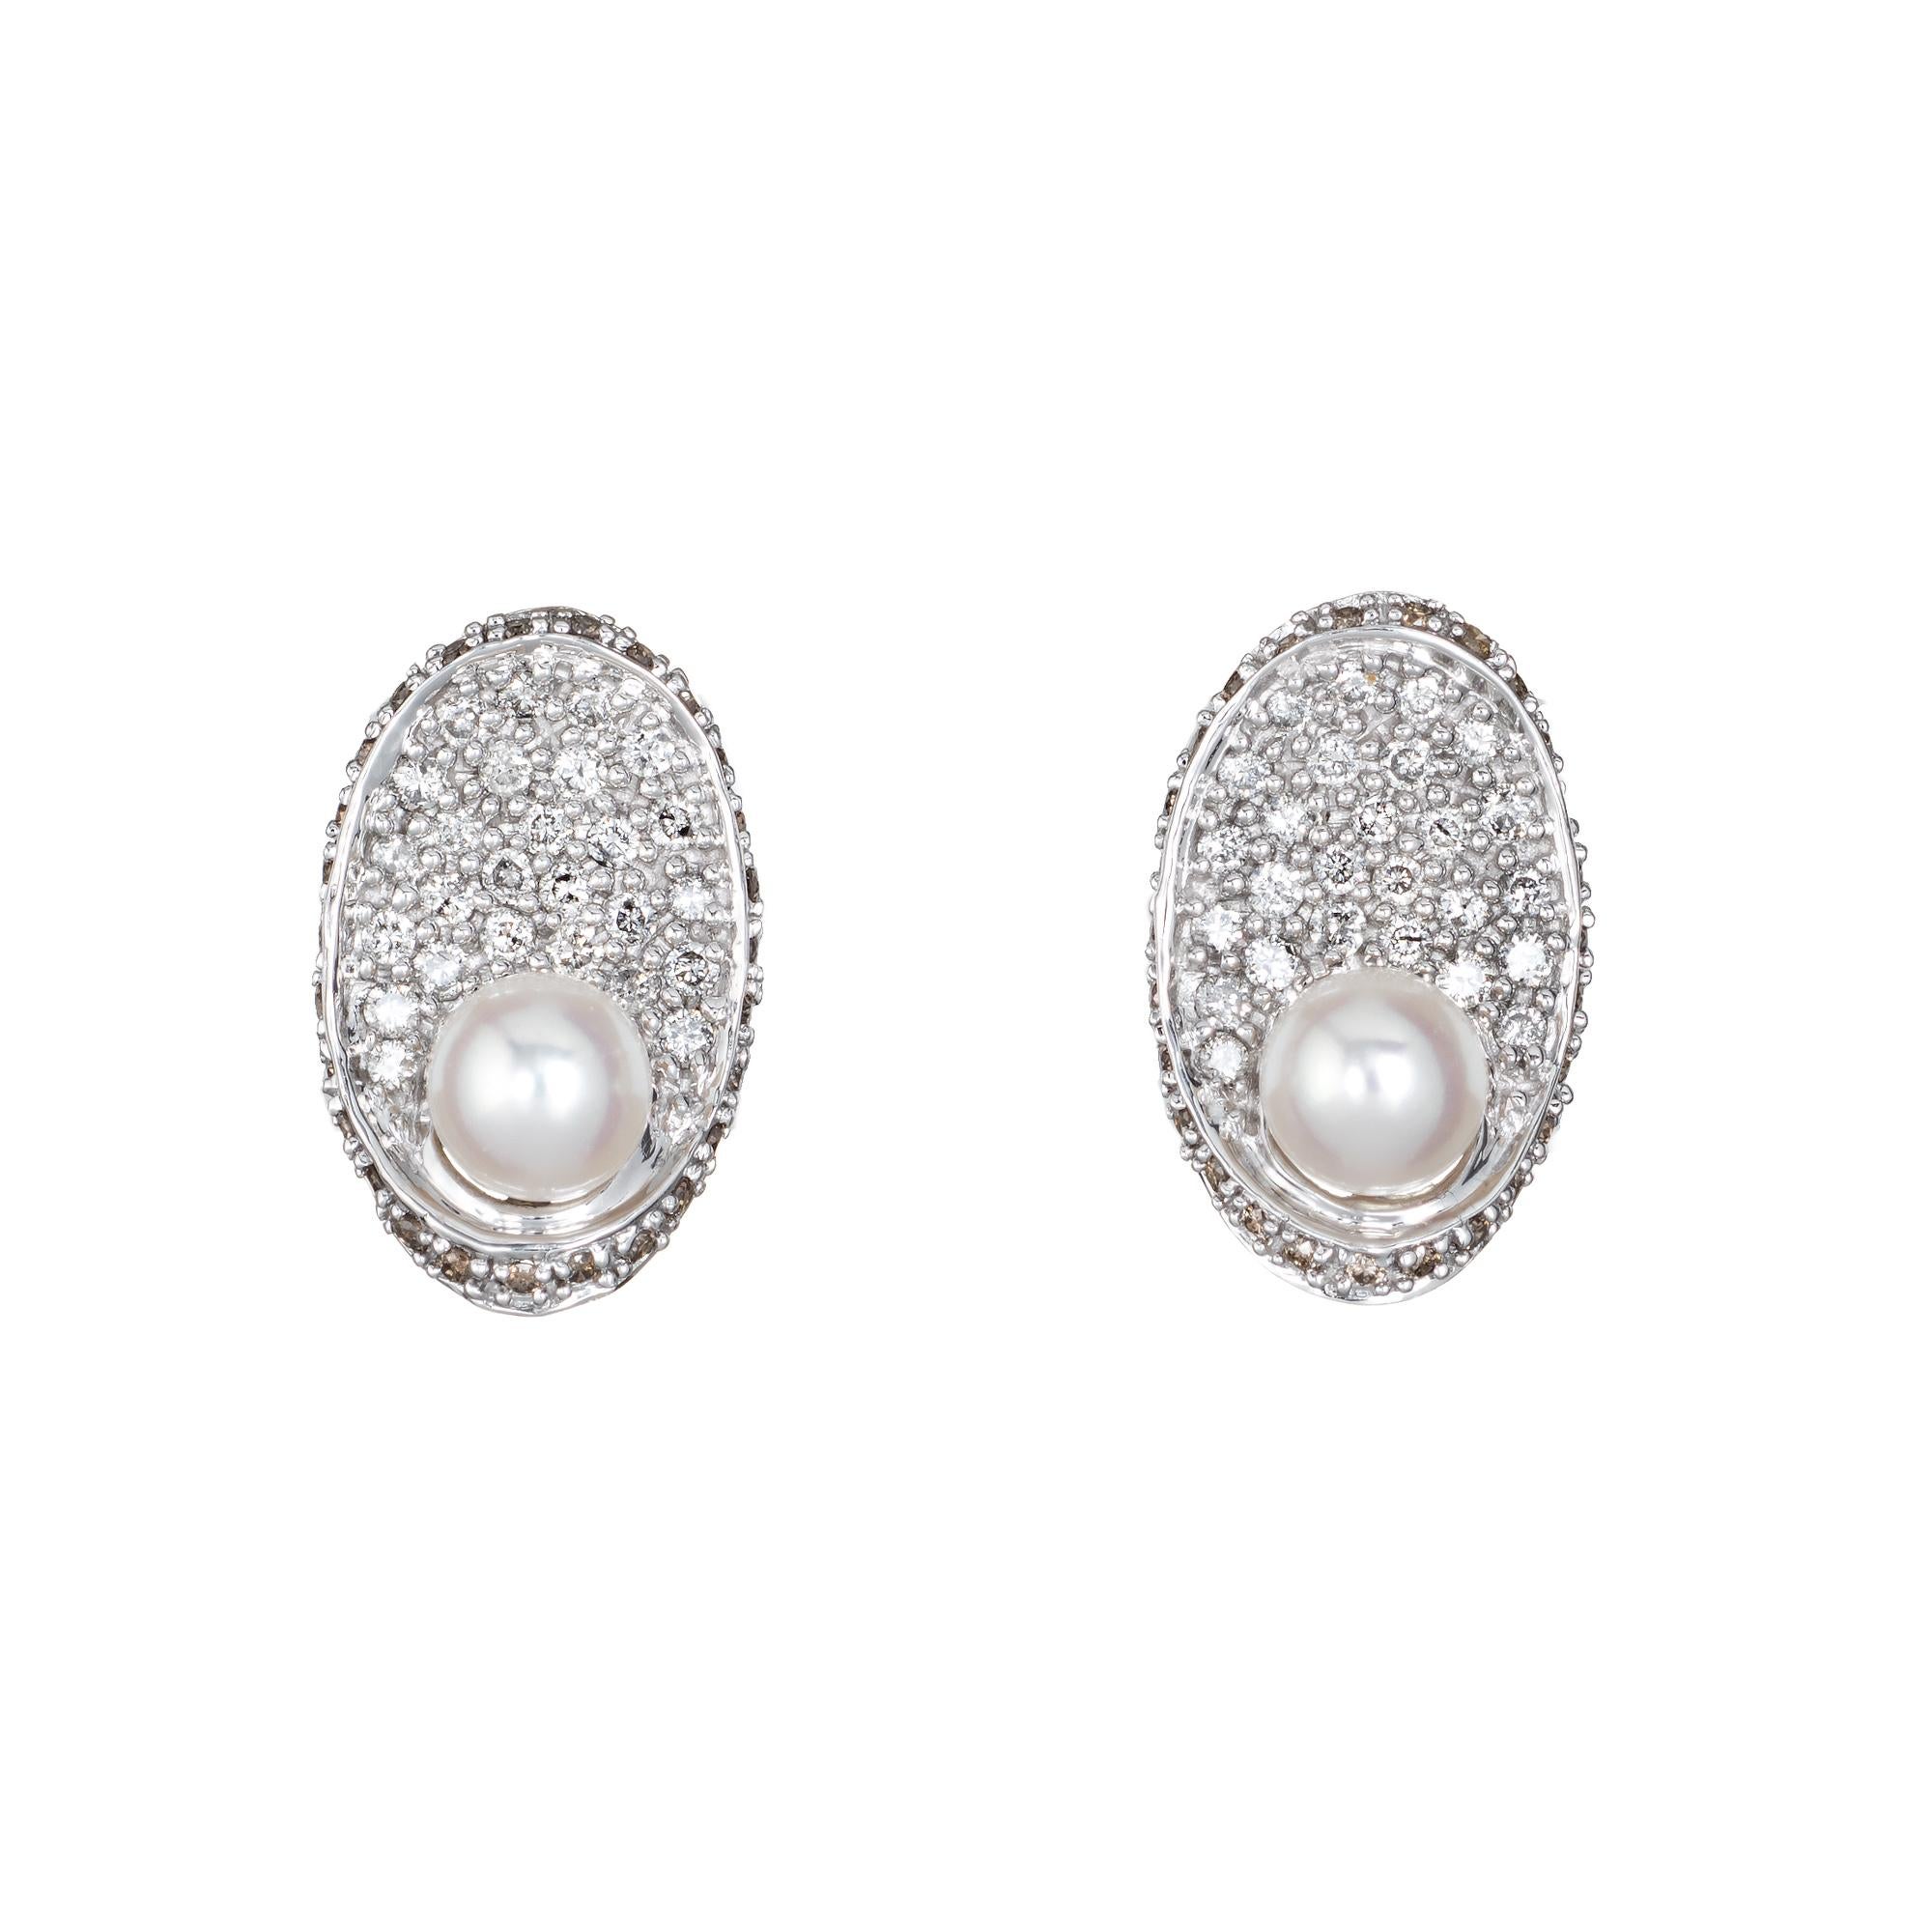 Elegant pair of pave diamond & cultured pearl earrings crafted in 14k white gold. 

Round brilliant cut diamonds total an estimated 0.84 carats (estimated at H-M color and VS2-SI1 clarity). Two 5.5mm cultured pearls accent the diamonds.  

The